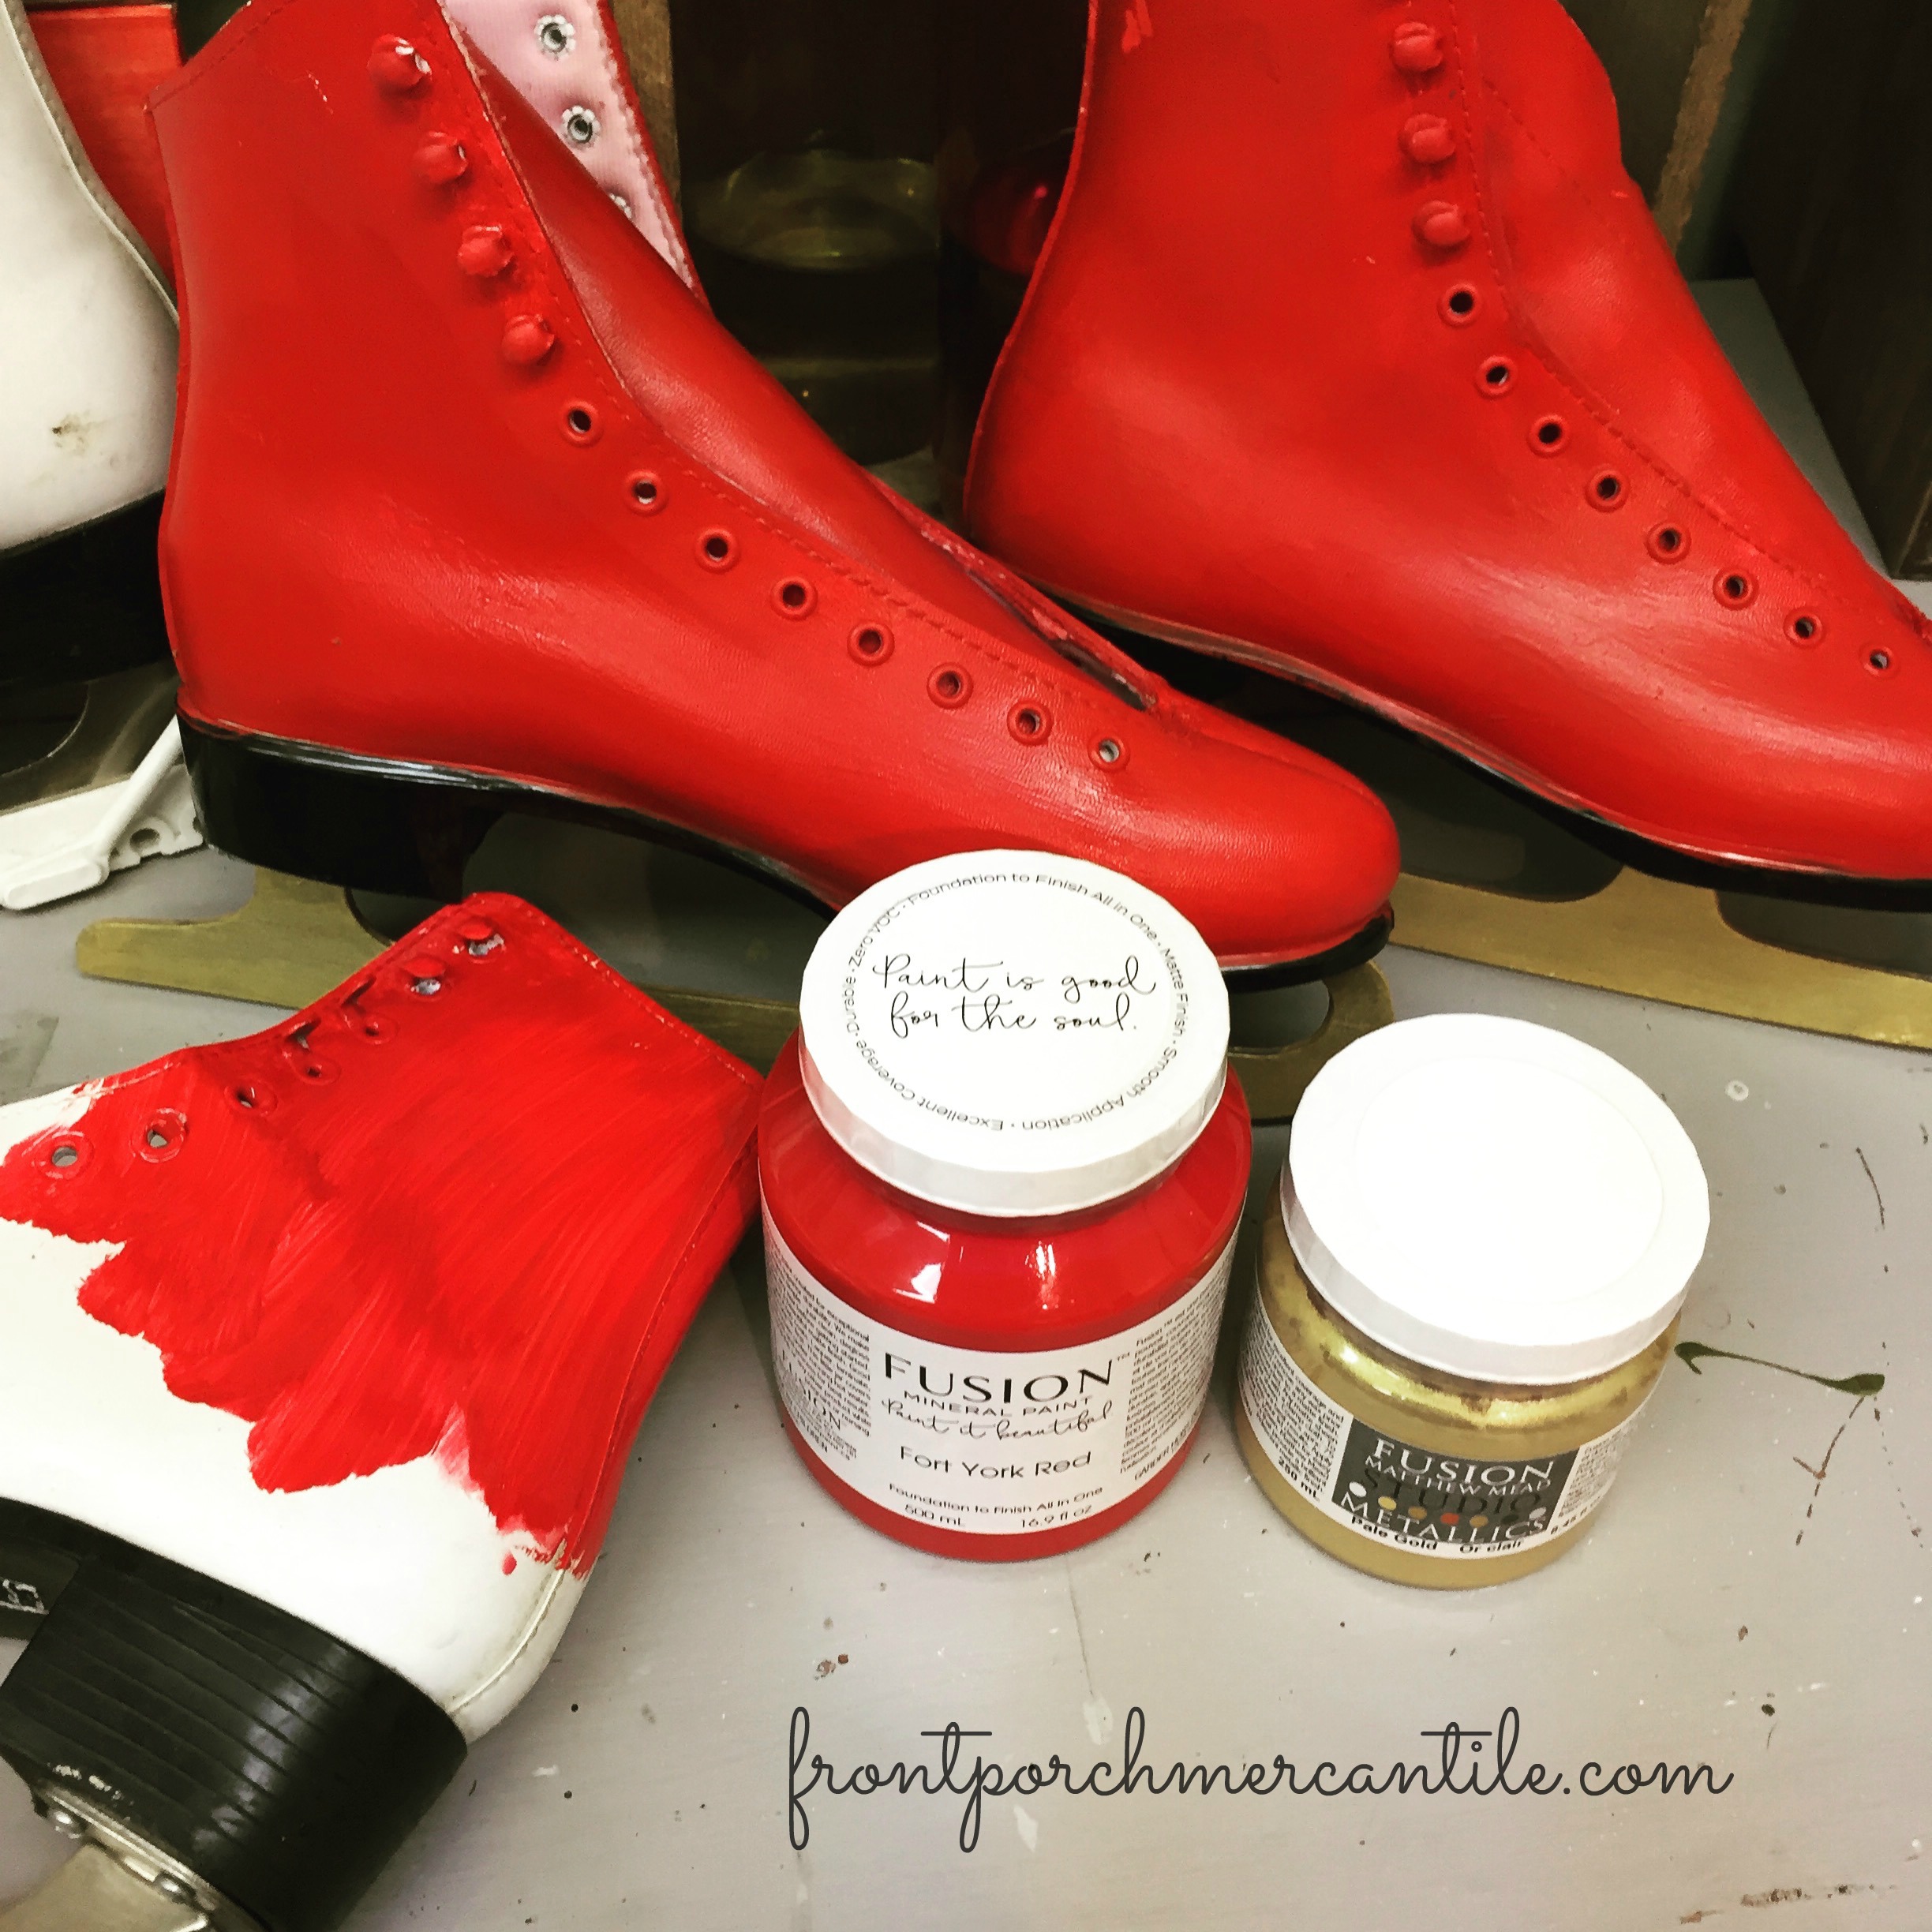 Painting skates with Fusion Mineral Paint